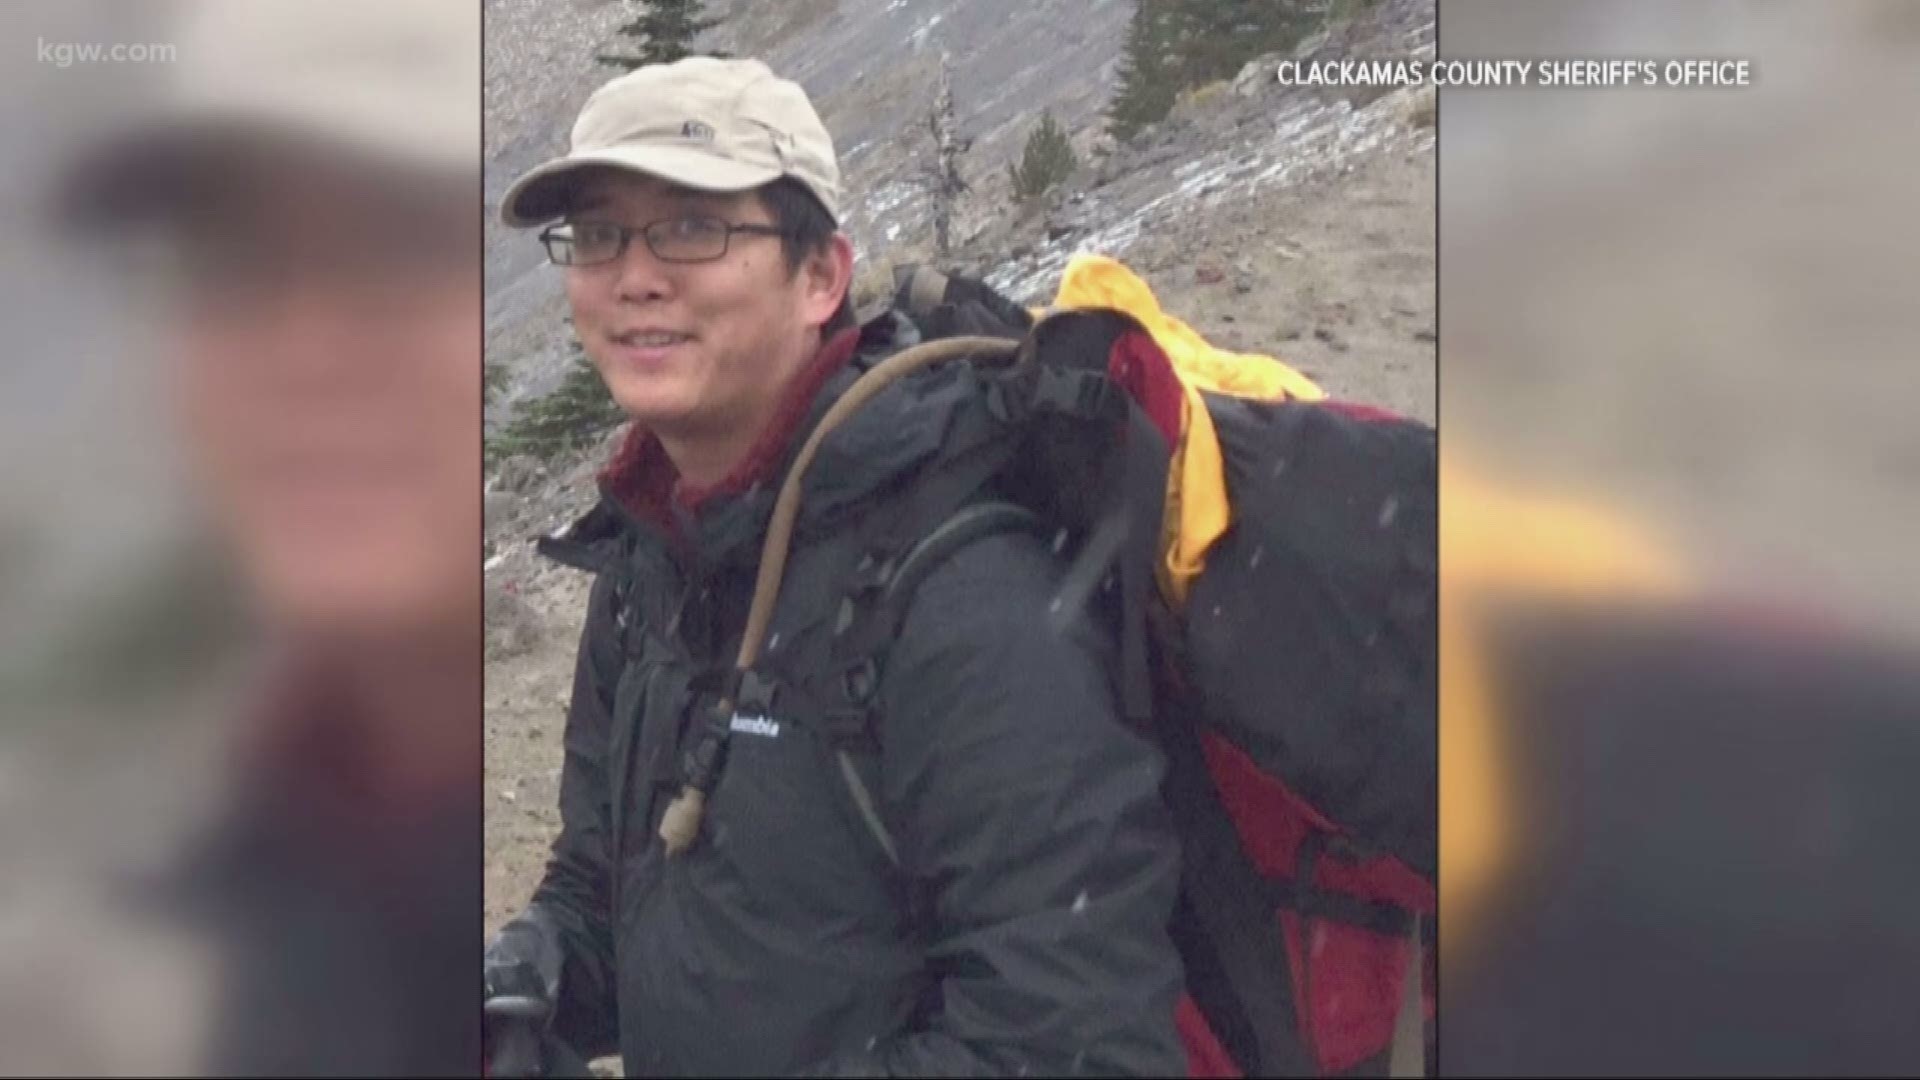 The family of a hiker who died on Mount Hood wants better signage on the mountain.